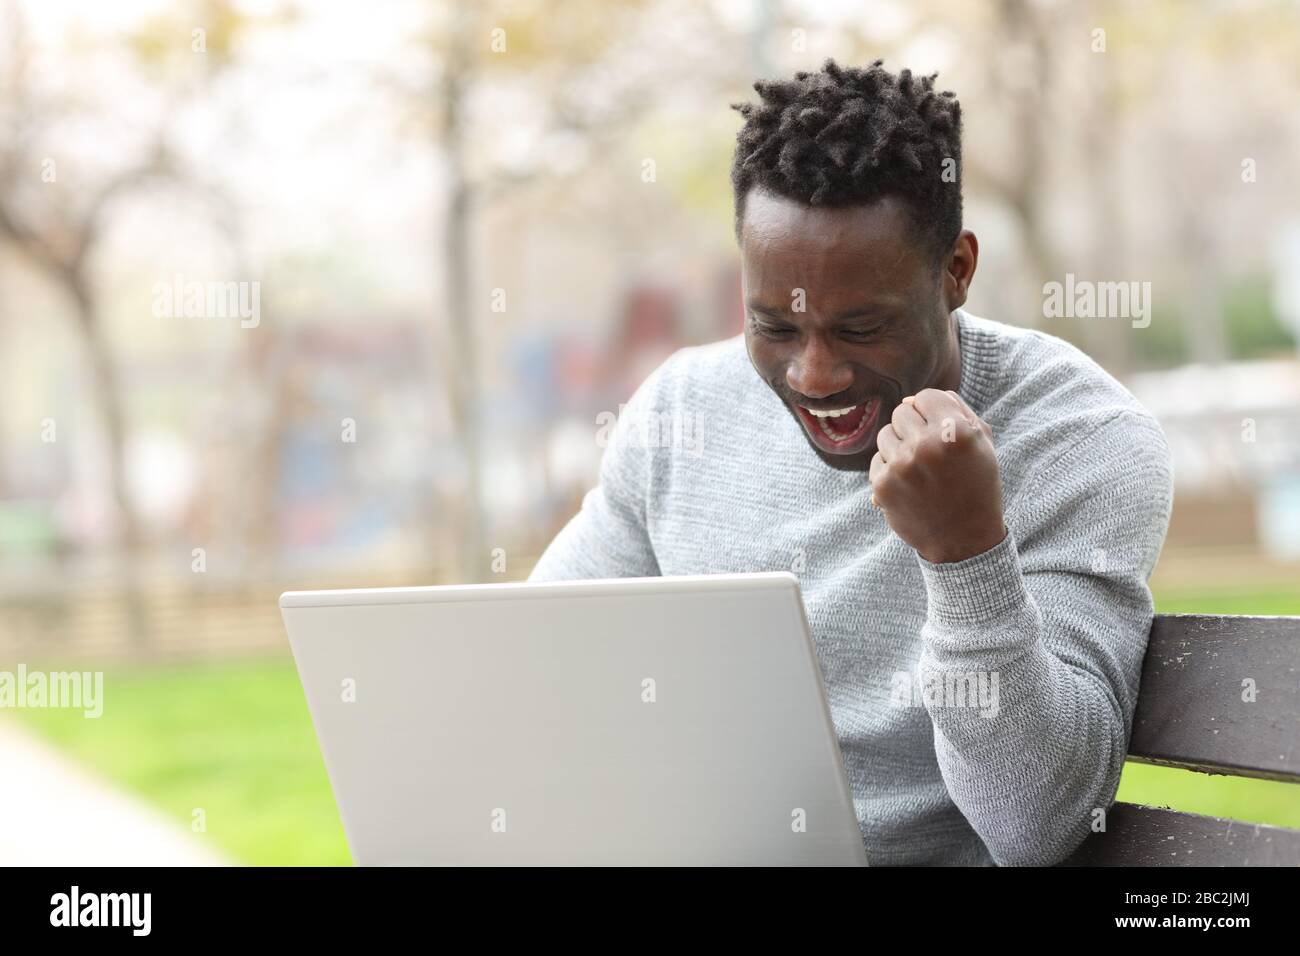 Excited black man celebrating checking laptop content sitting on a bench in a park Stock Photo